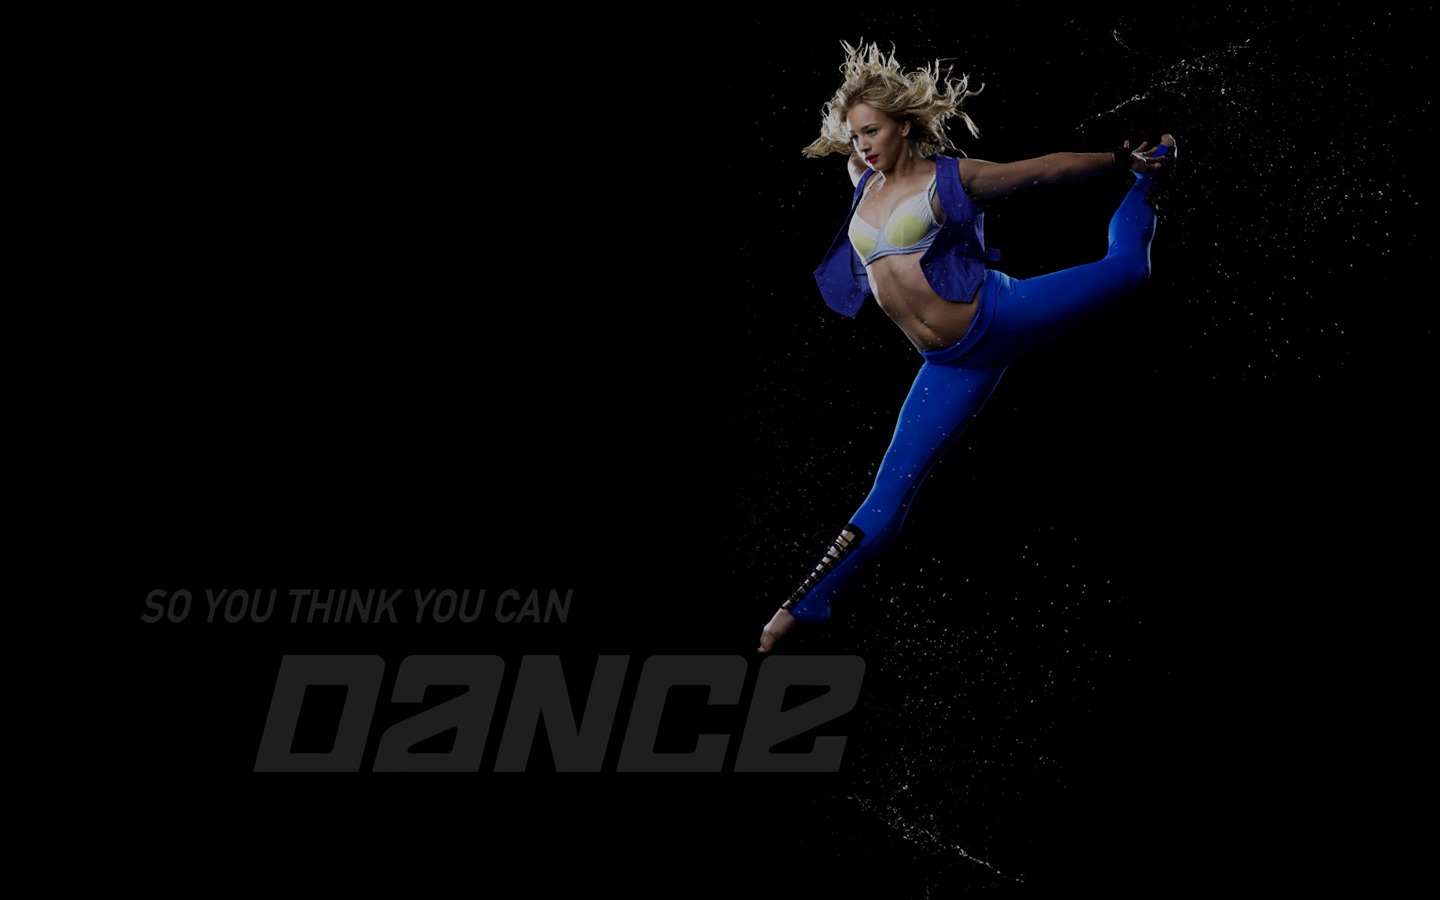 So You Think You Can Dance wallpaper (2) #19 - 1440x900